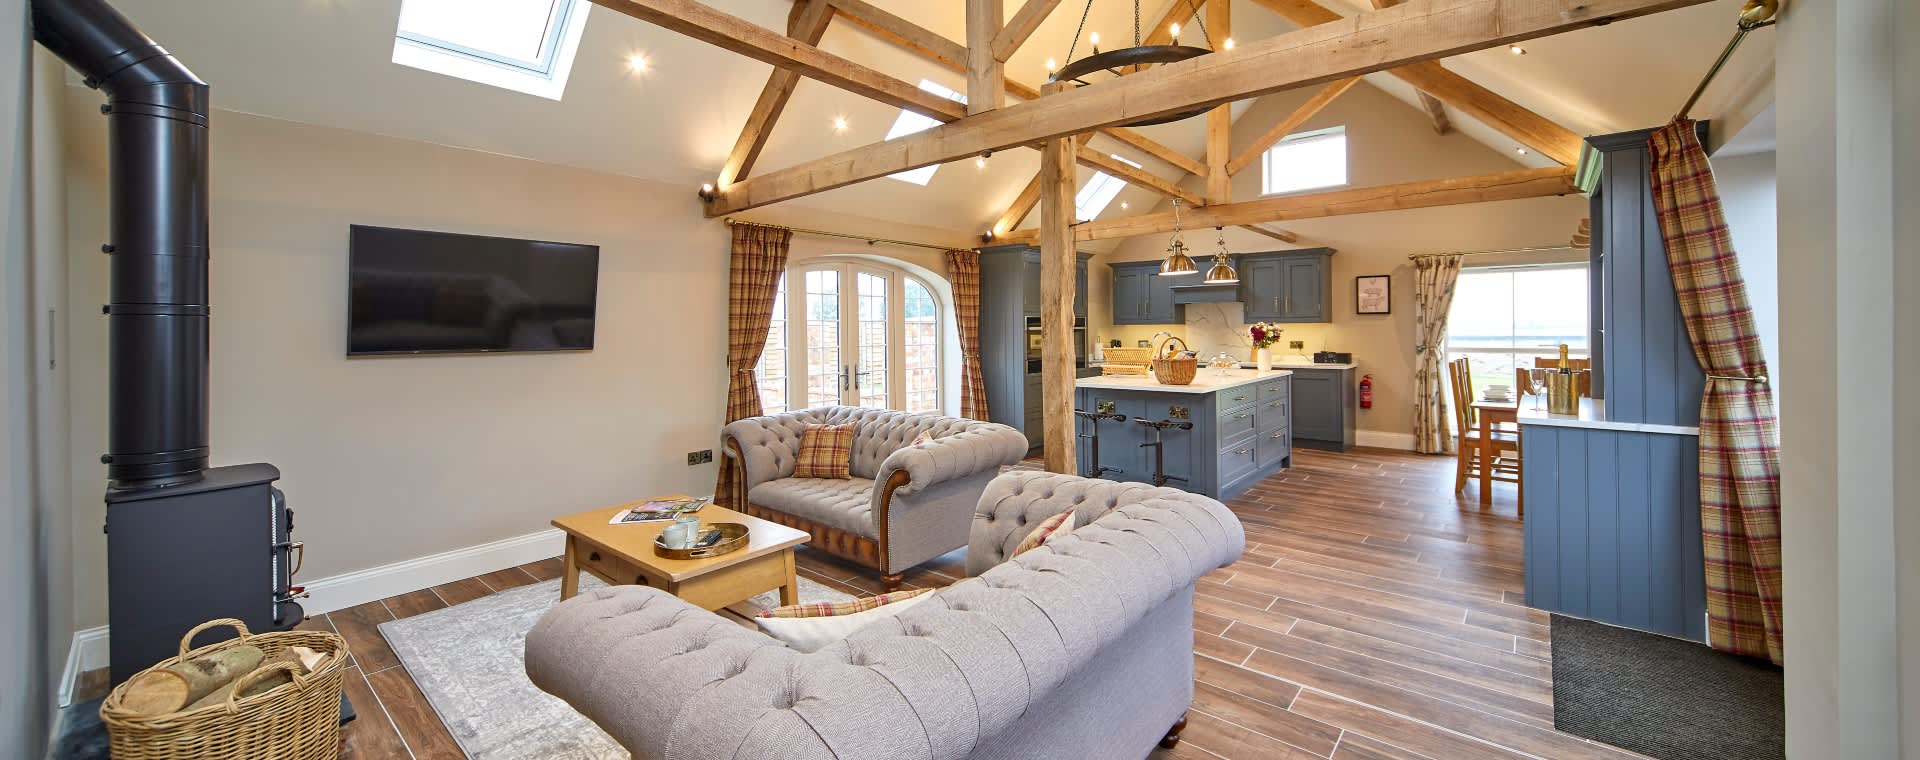 Living area and kitchen at Pasture House Holiday Cottages in East Yorkshire